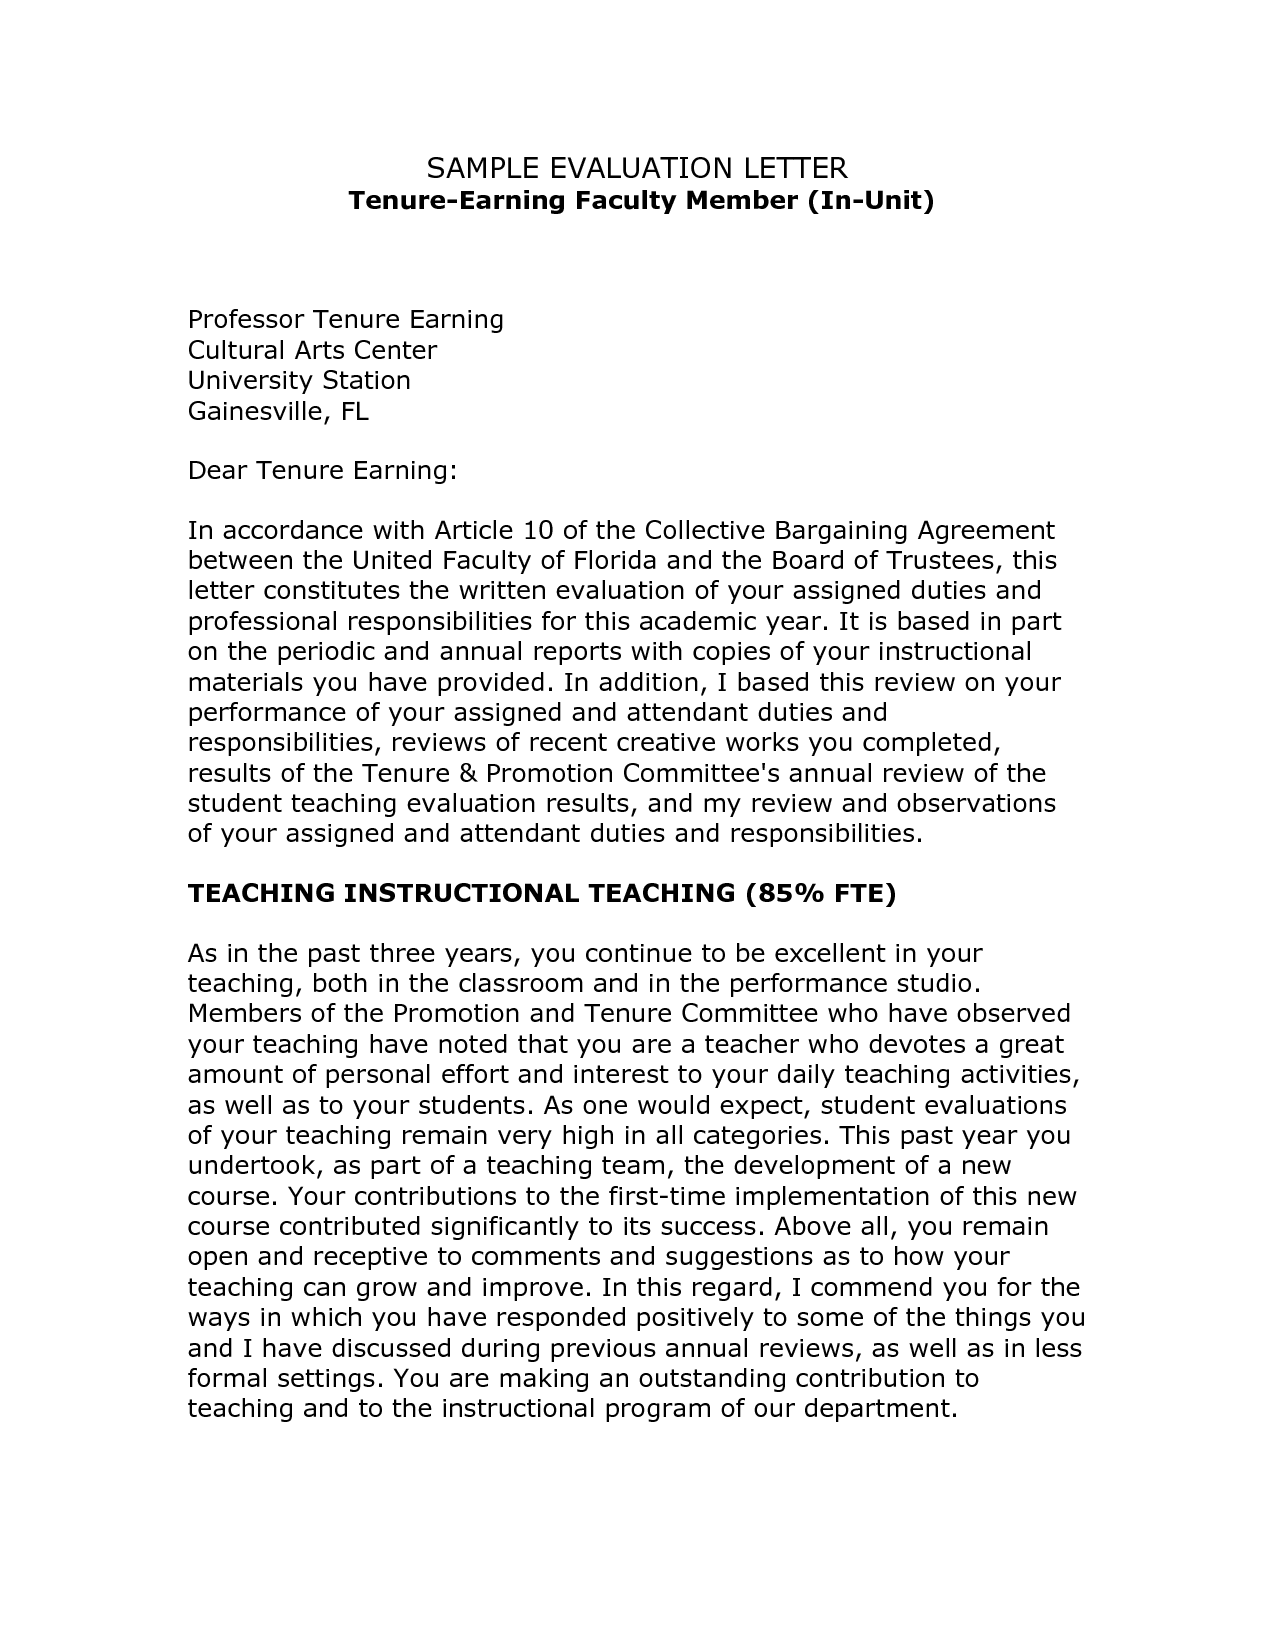 recommendation letter for teacher tenure
 Best Photos of Students Evaluation Letter Sample - Intern ..